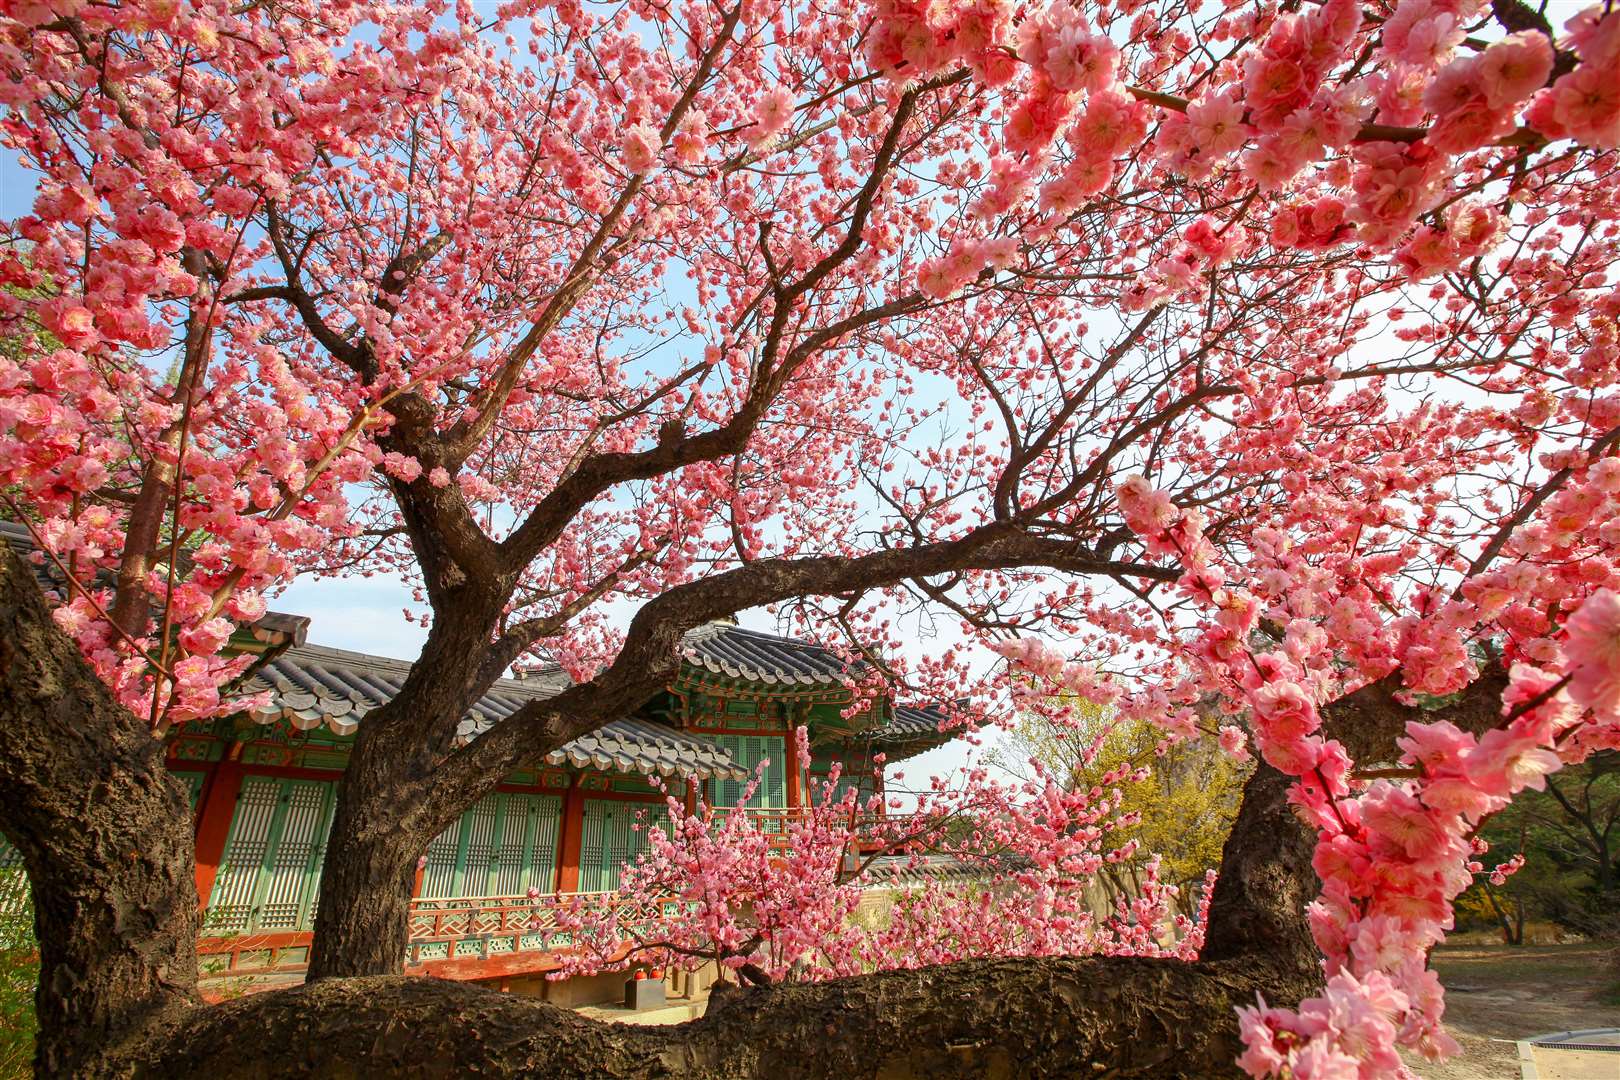 Changdeokgung Palace in full cherry blossom beauty. Picture courtesy of the Korean Tourist Organization.